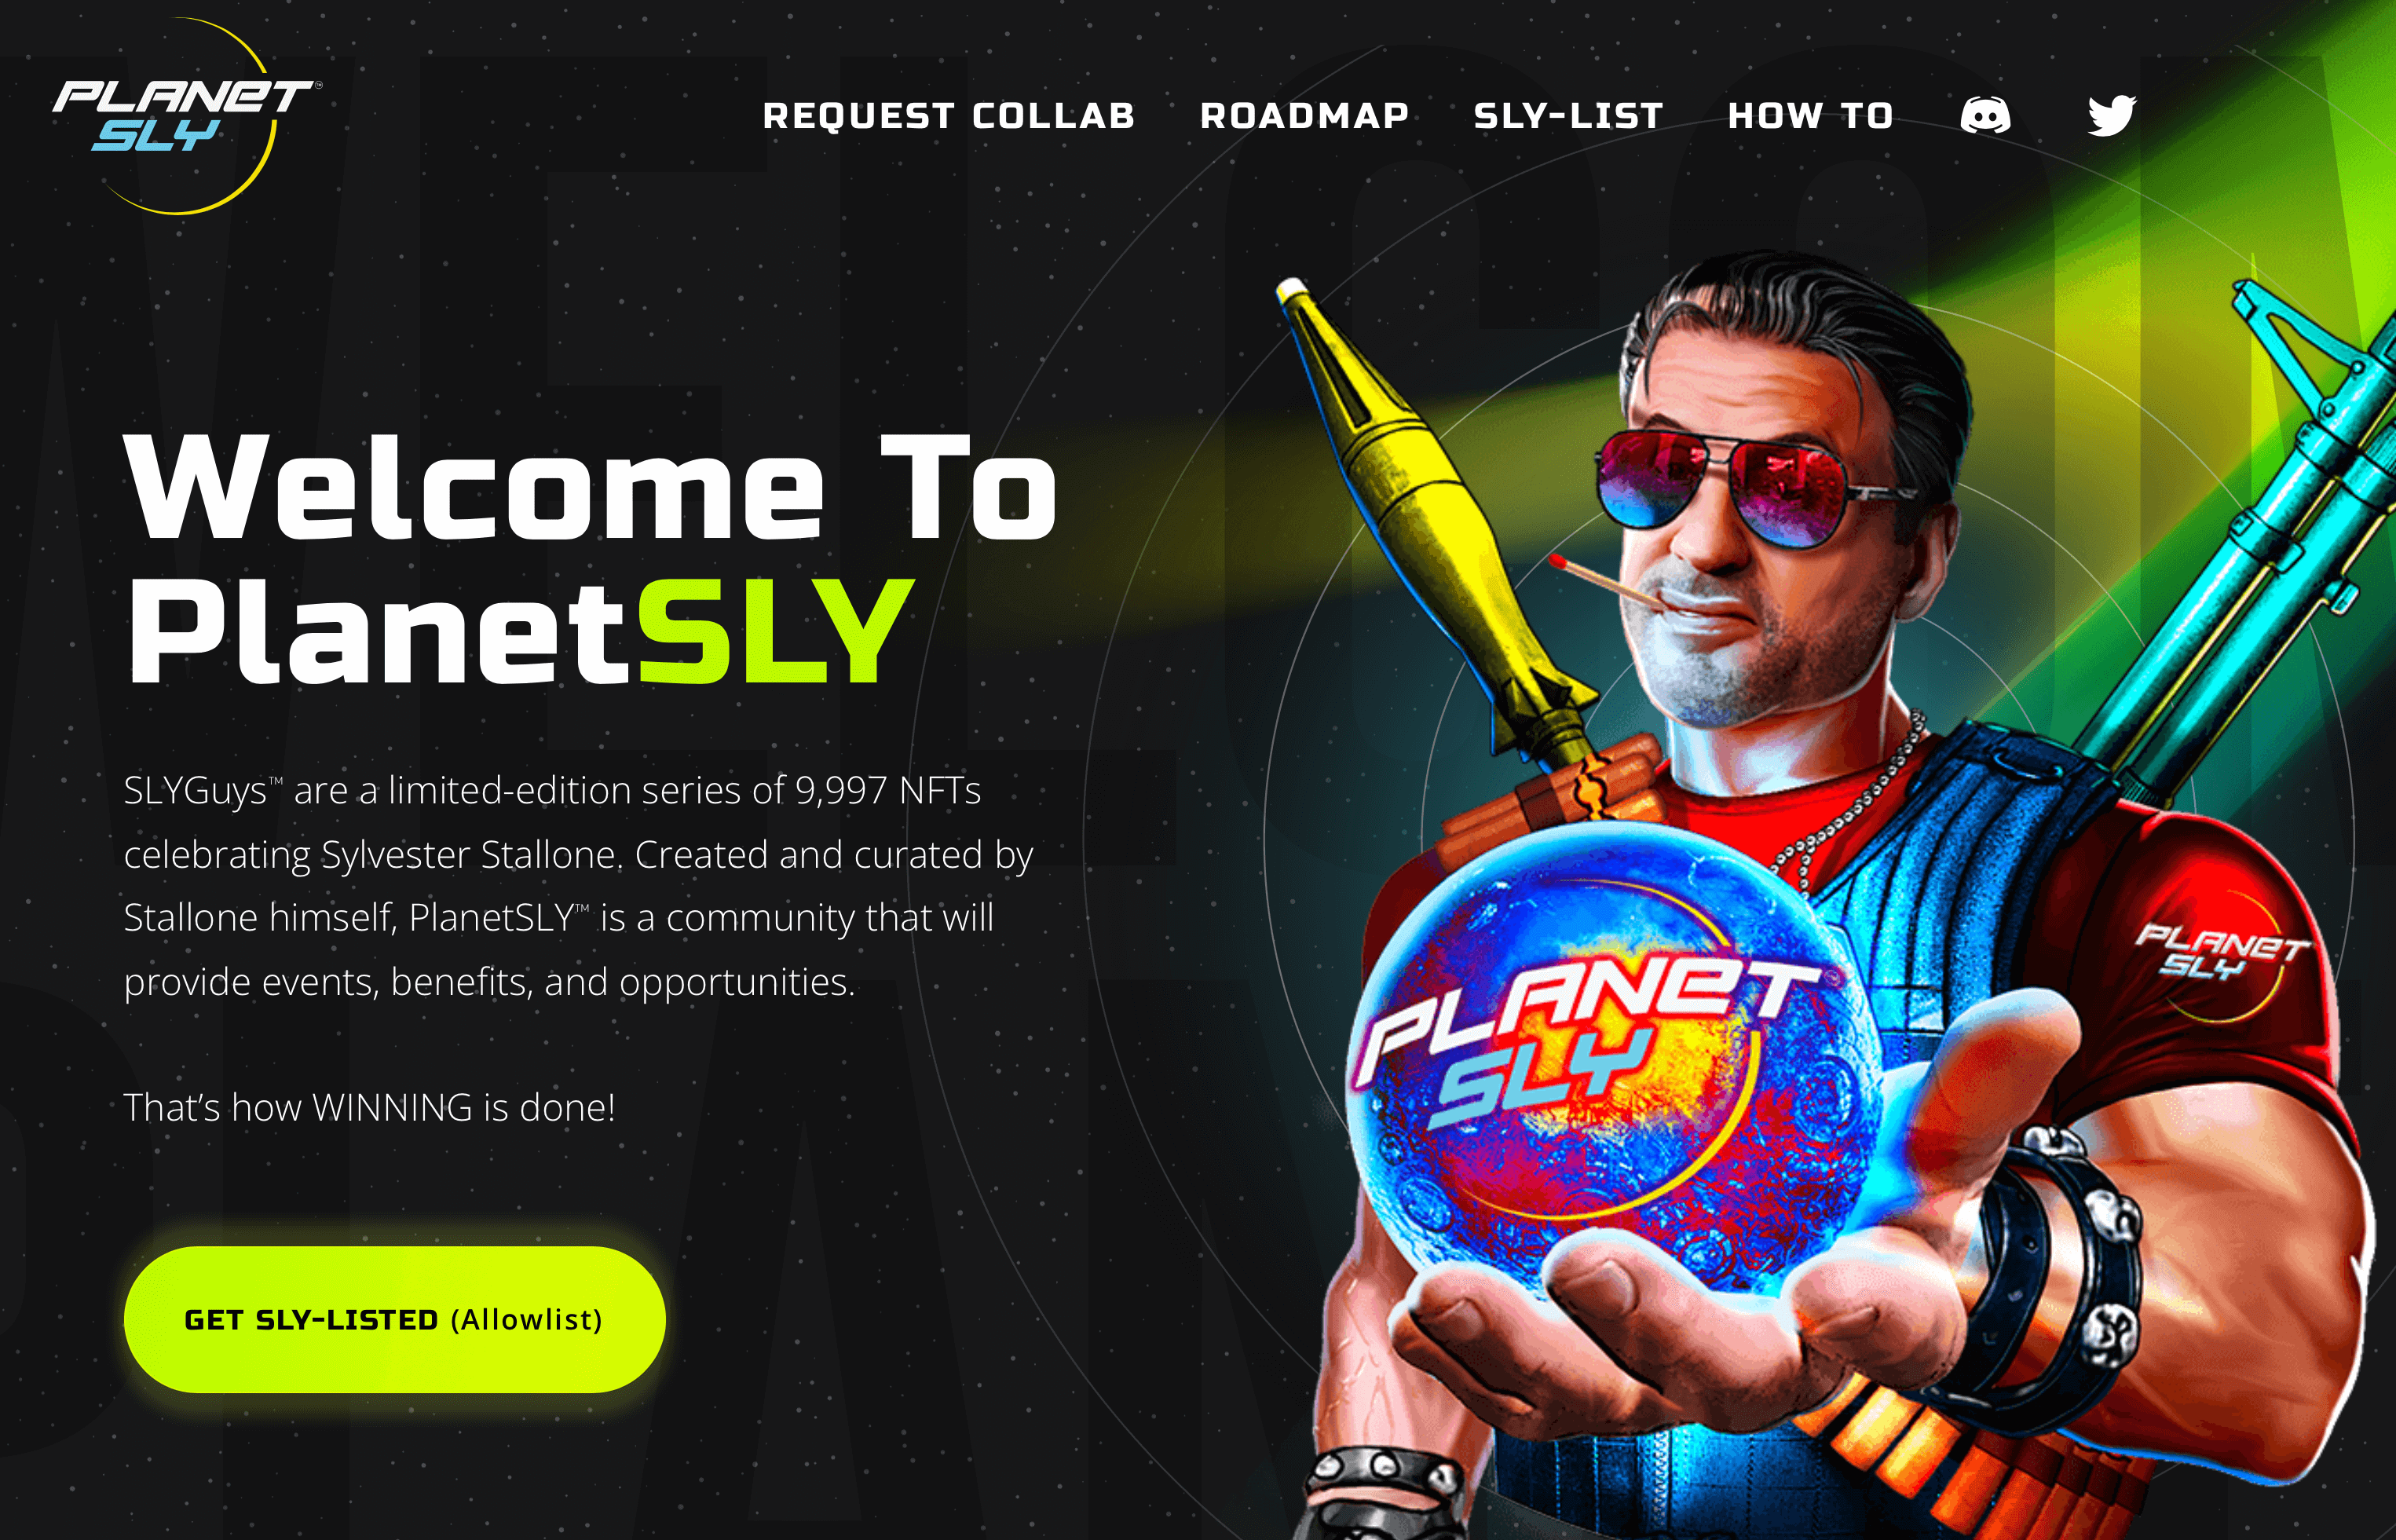 image of PlanetSLY website